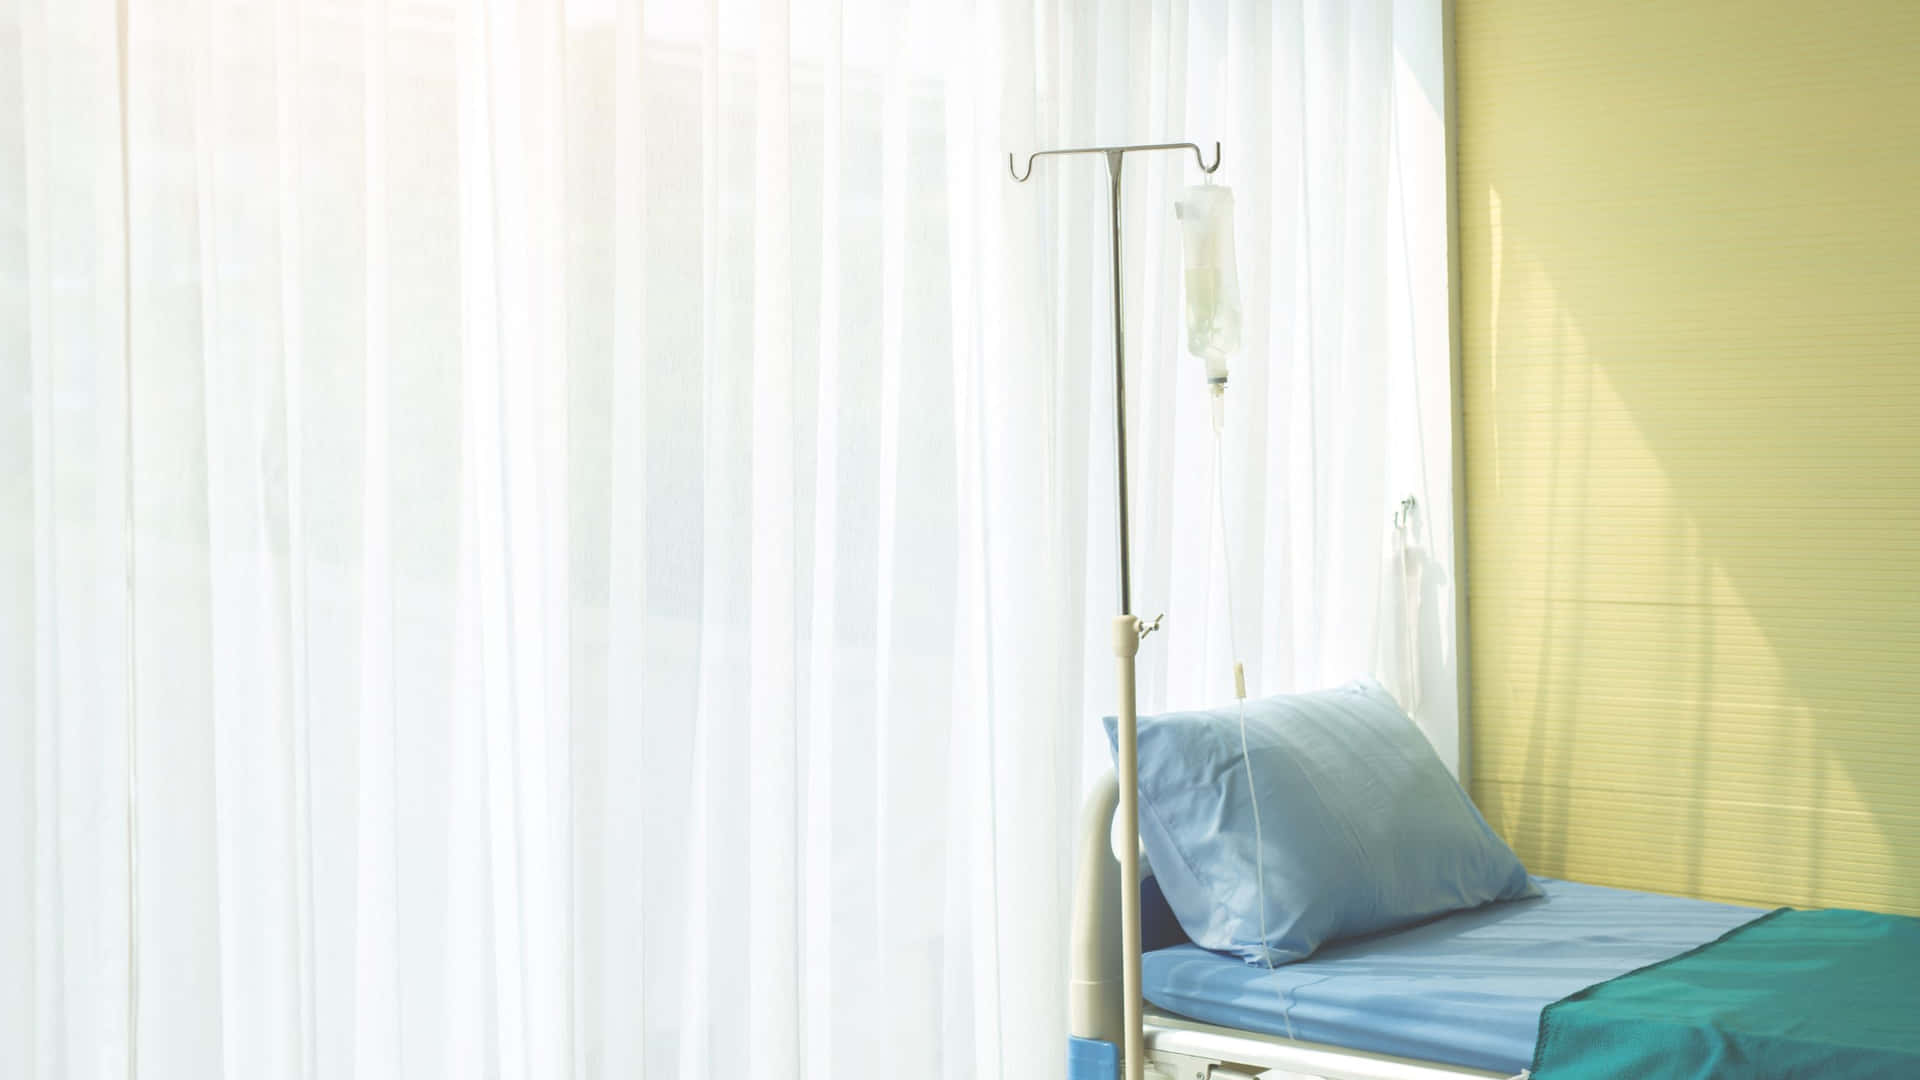 A Hospital Bed With A Blue Blanket And Yellow Curtains